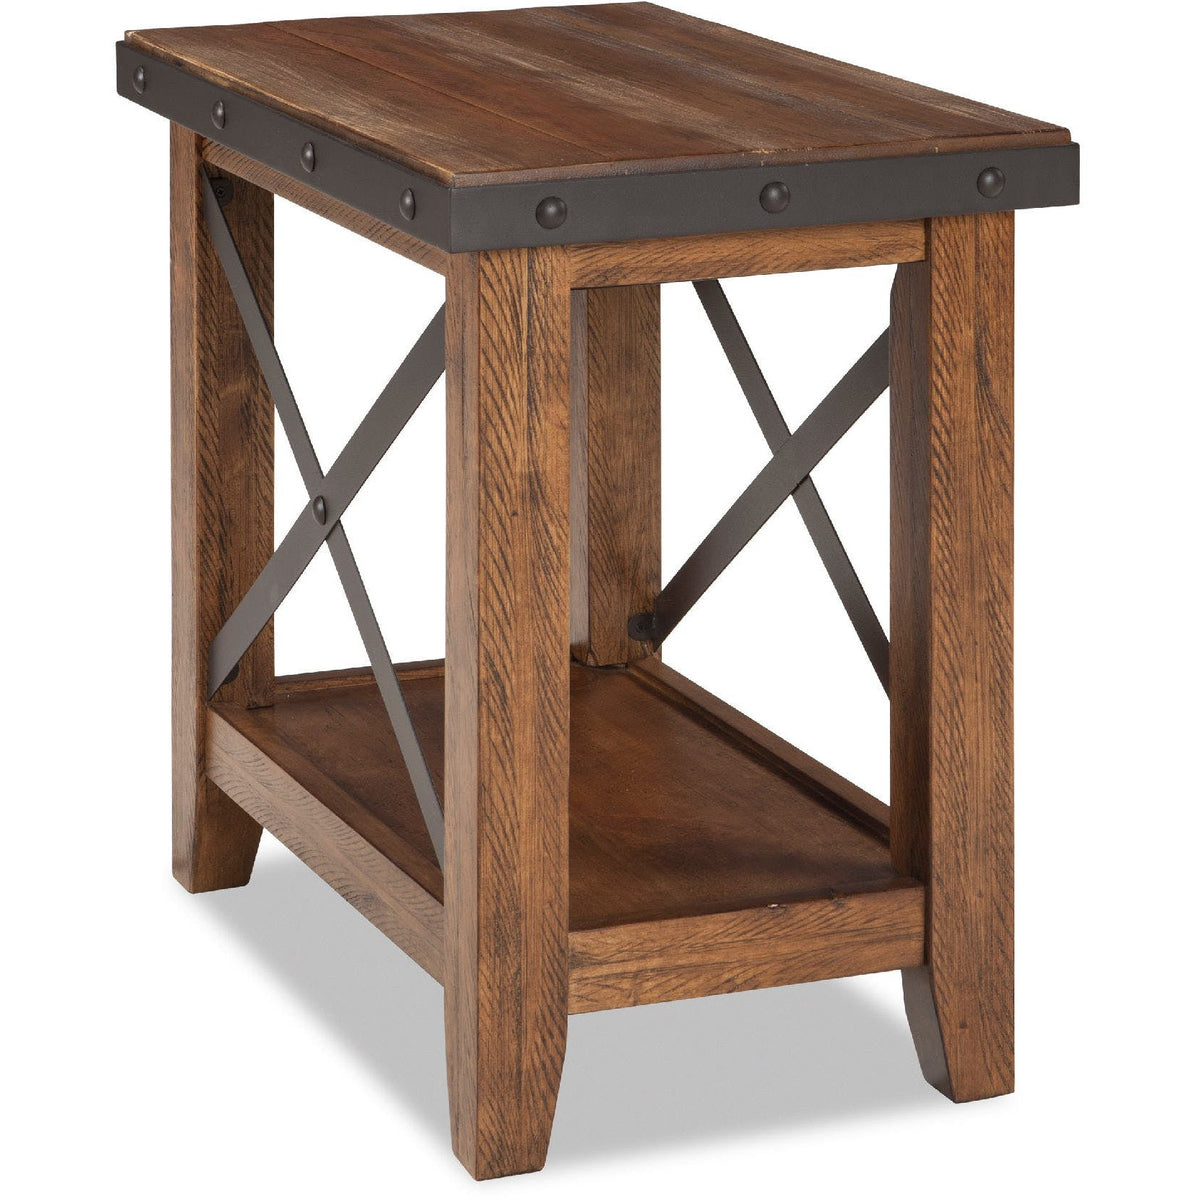 Intercon Taos Chairside Table